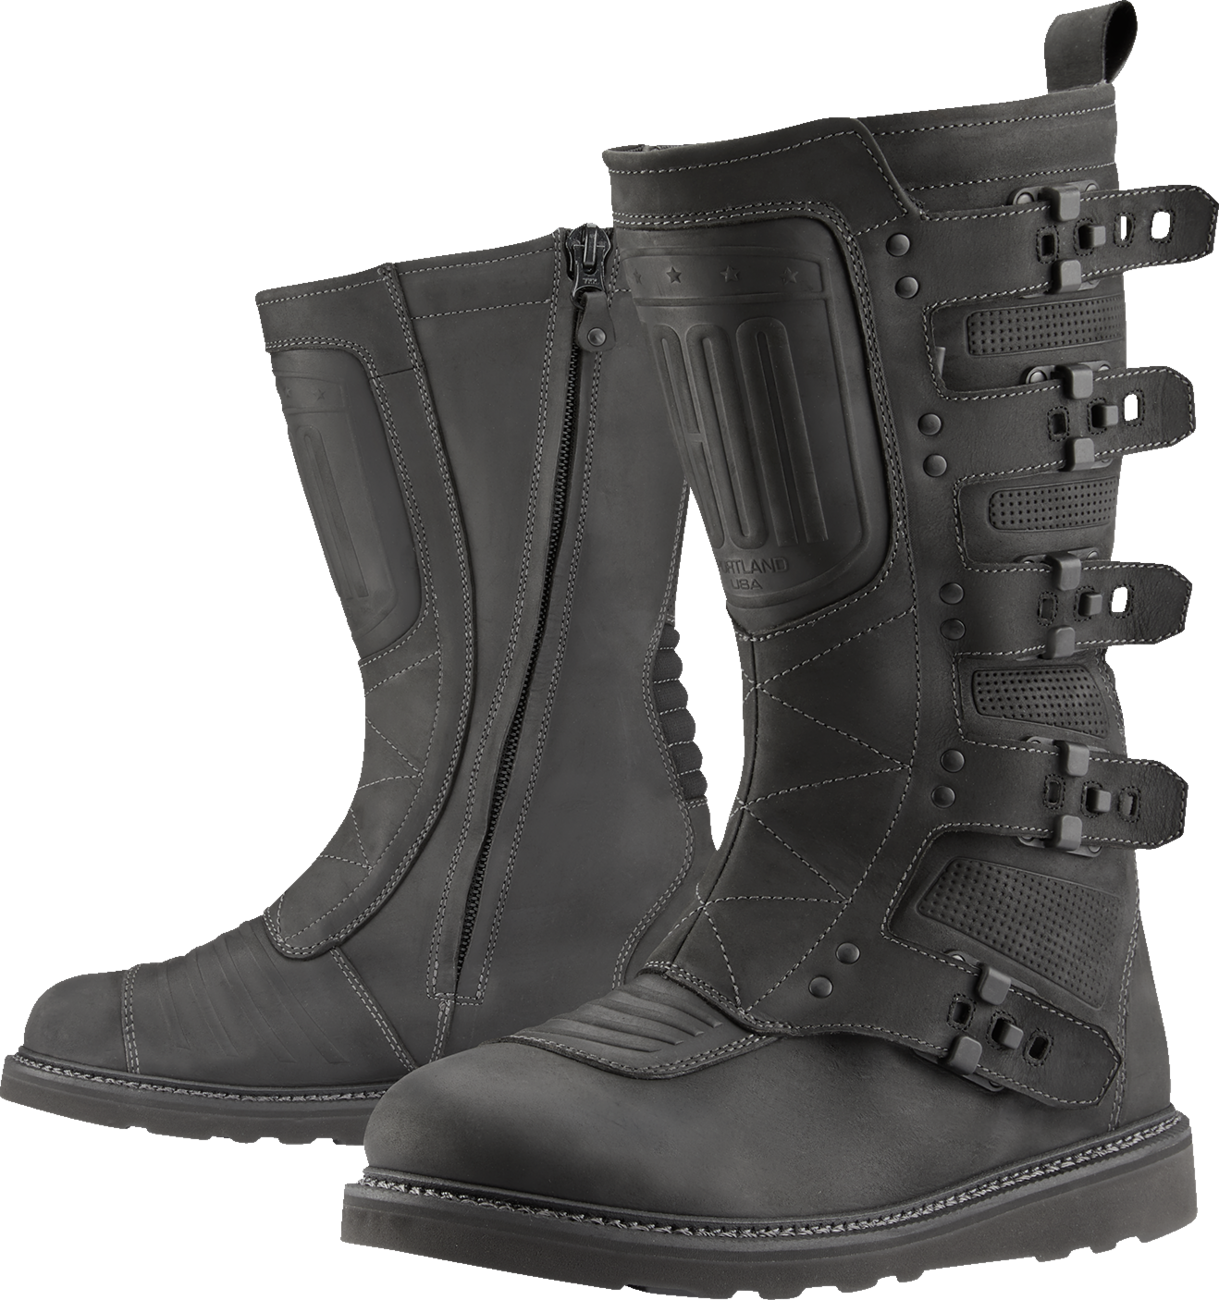 ICON Elsinore 2™ CE Boots - Black - Size 12 3403-1217